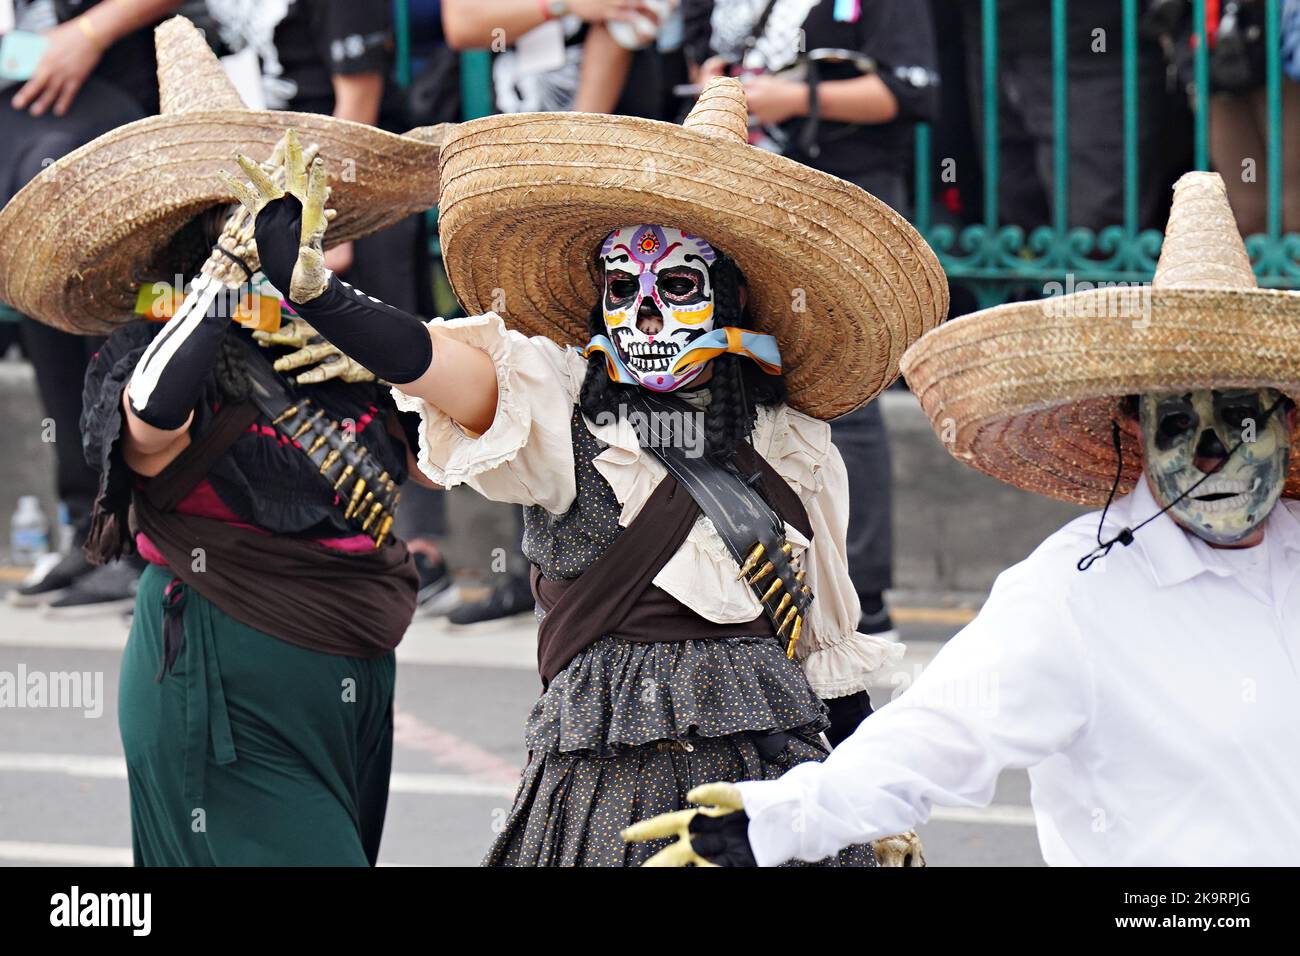 Mexico City, Mexico. 29th Oct, 2022. Performers wearing Mexican sombreros and skeleton costumes perform in the Grand Parade of the Dead to celebrate Dia de los Muertos holiday on Paseo de la Reforma, October 29, 2022 in Mexico City, Mexico. Credit: Richard Ellis/Richard Ellis/Alamy Live News Stock Photo